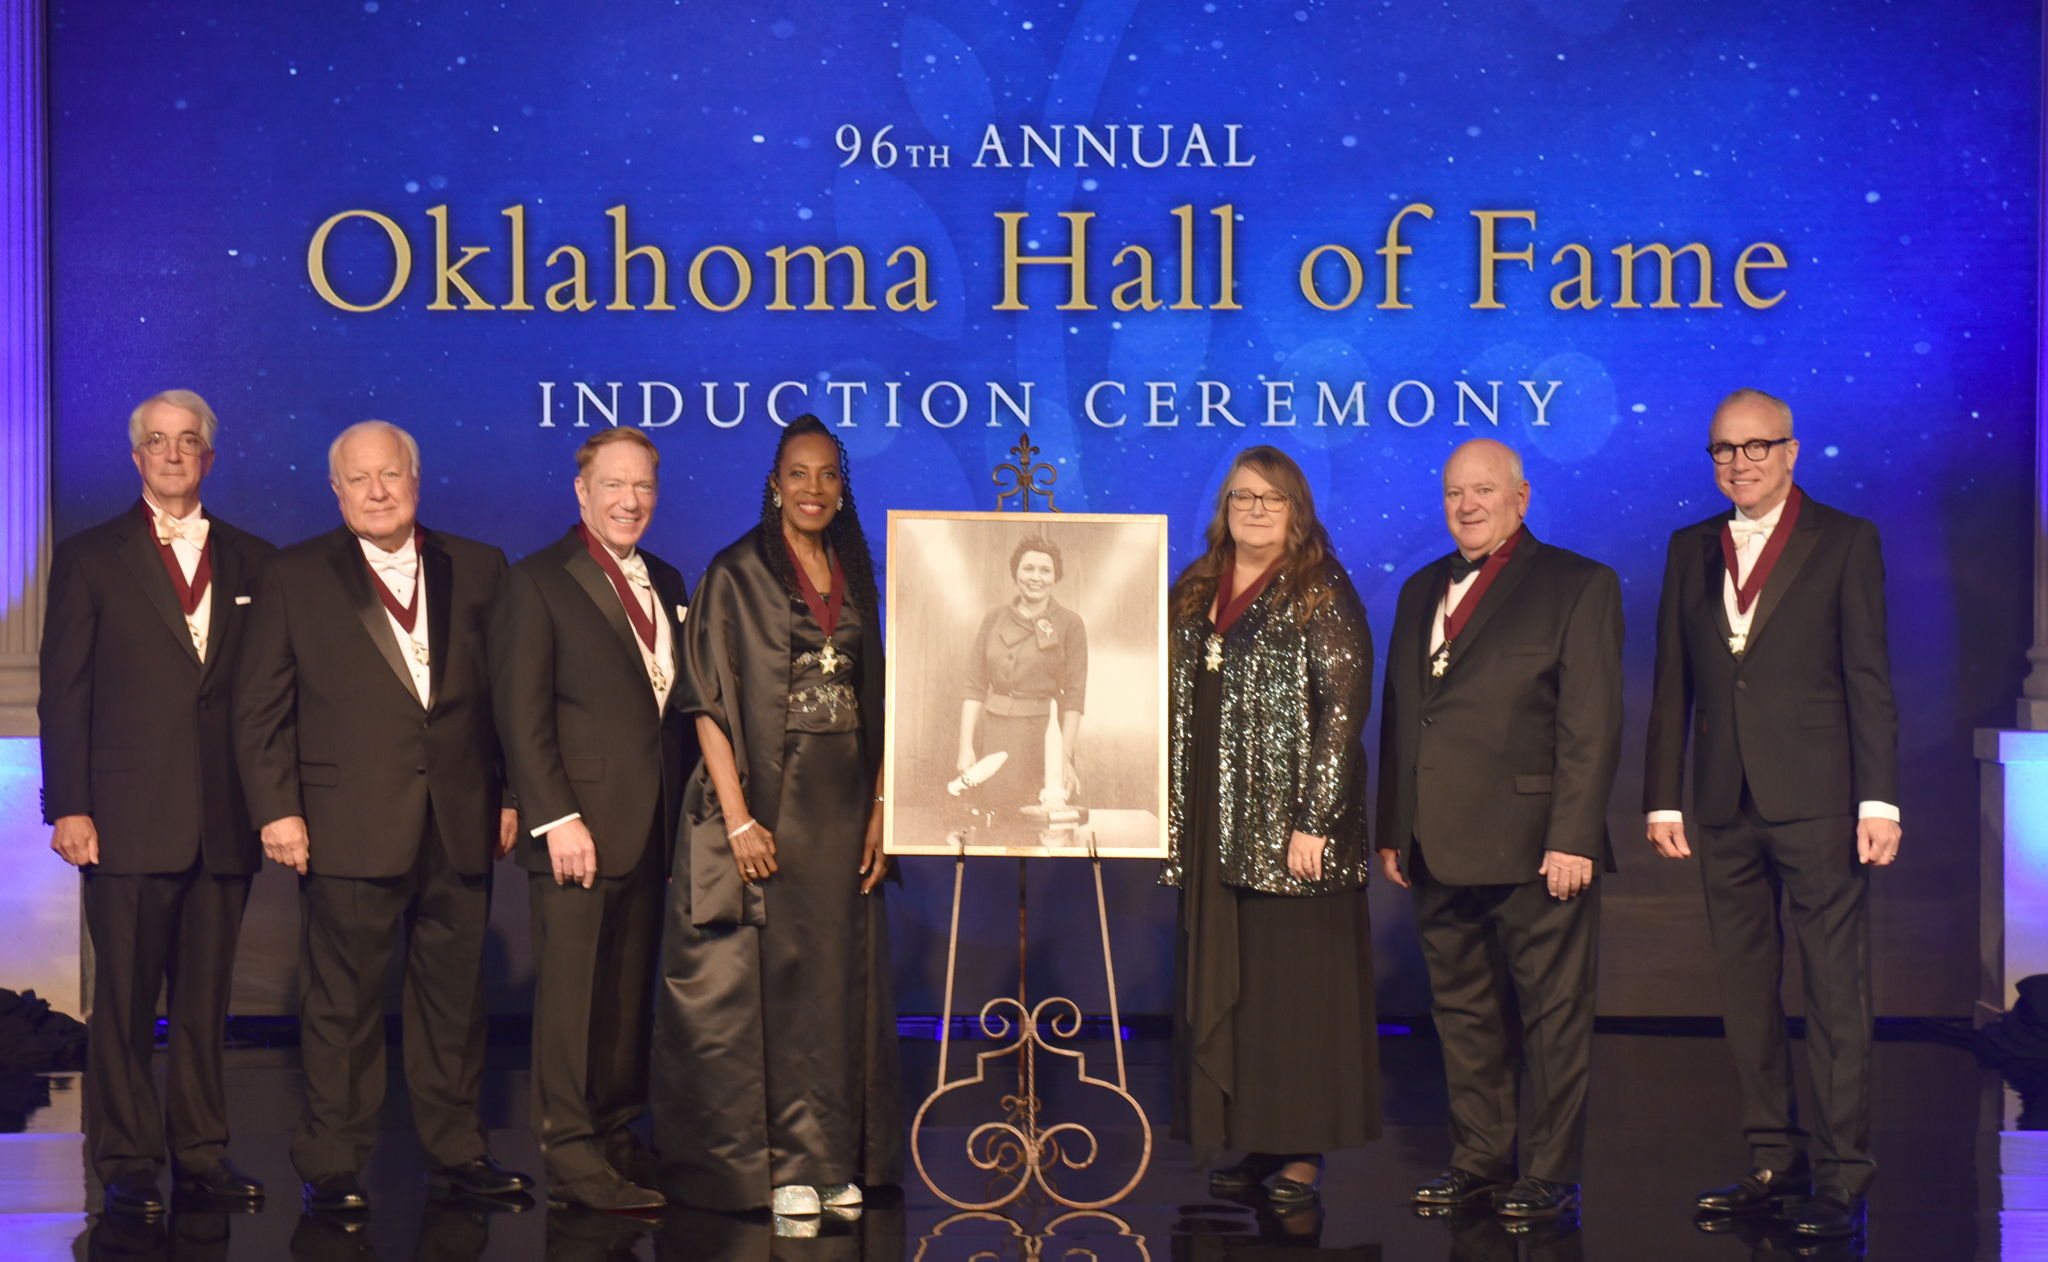 Oklahoma’s Highest Honor Celebrated, $6000 Oklahoma Hall of Fame Scholar Announced, and Mission Moment Recap